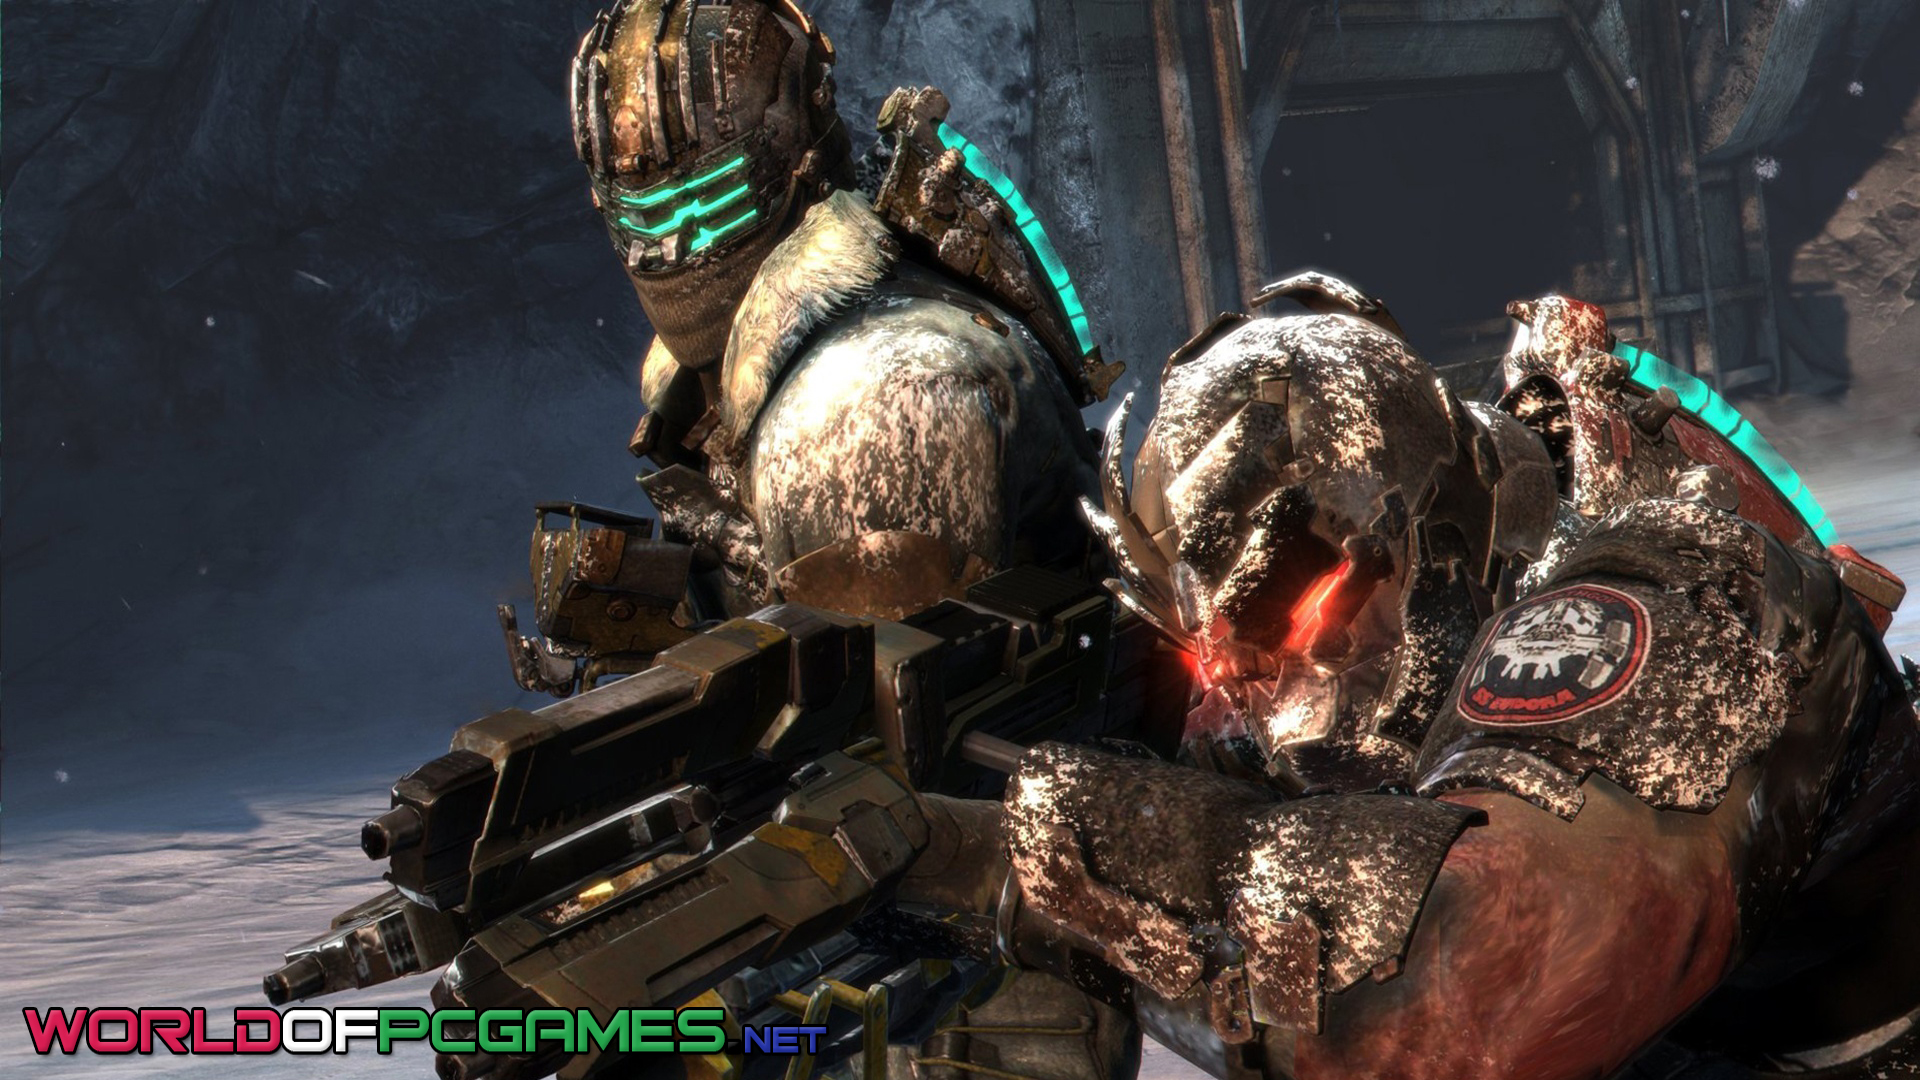 Dead Space 3 Free Download PC Game By worldof-pcgames.netm